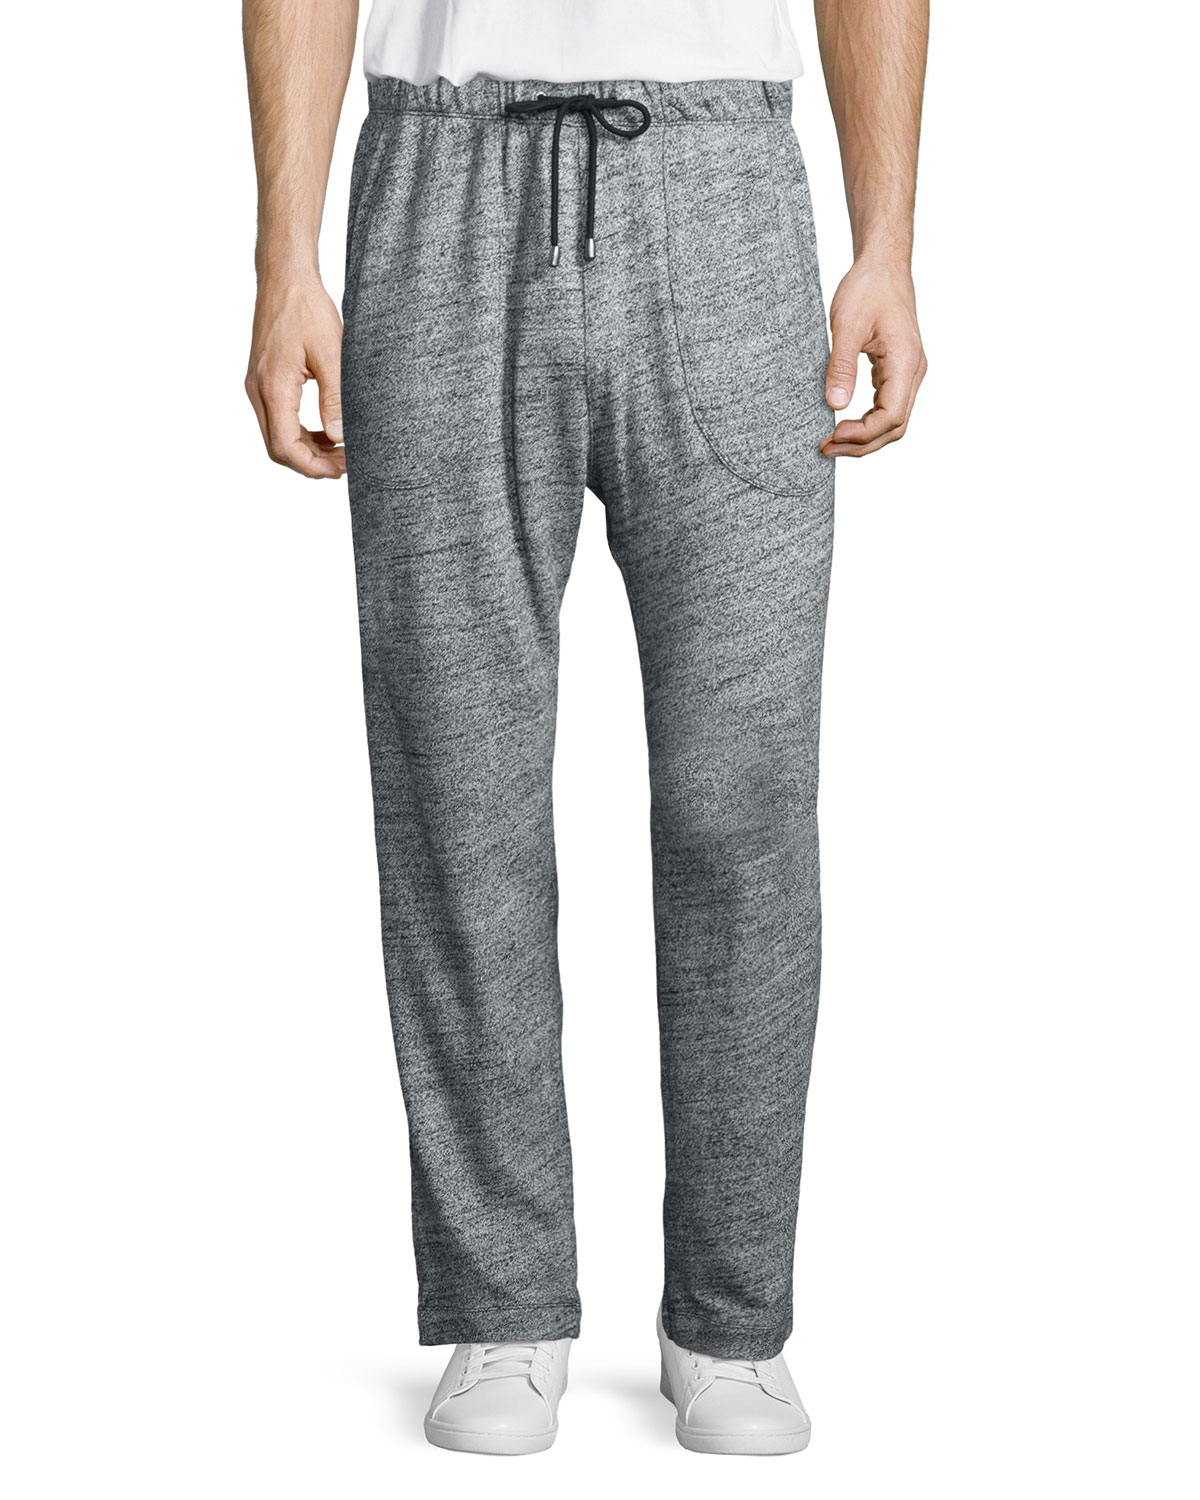 Lyst - Ugg Heathered Jersey Lounge Pants in Gray for Men